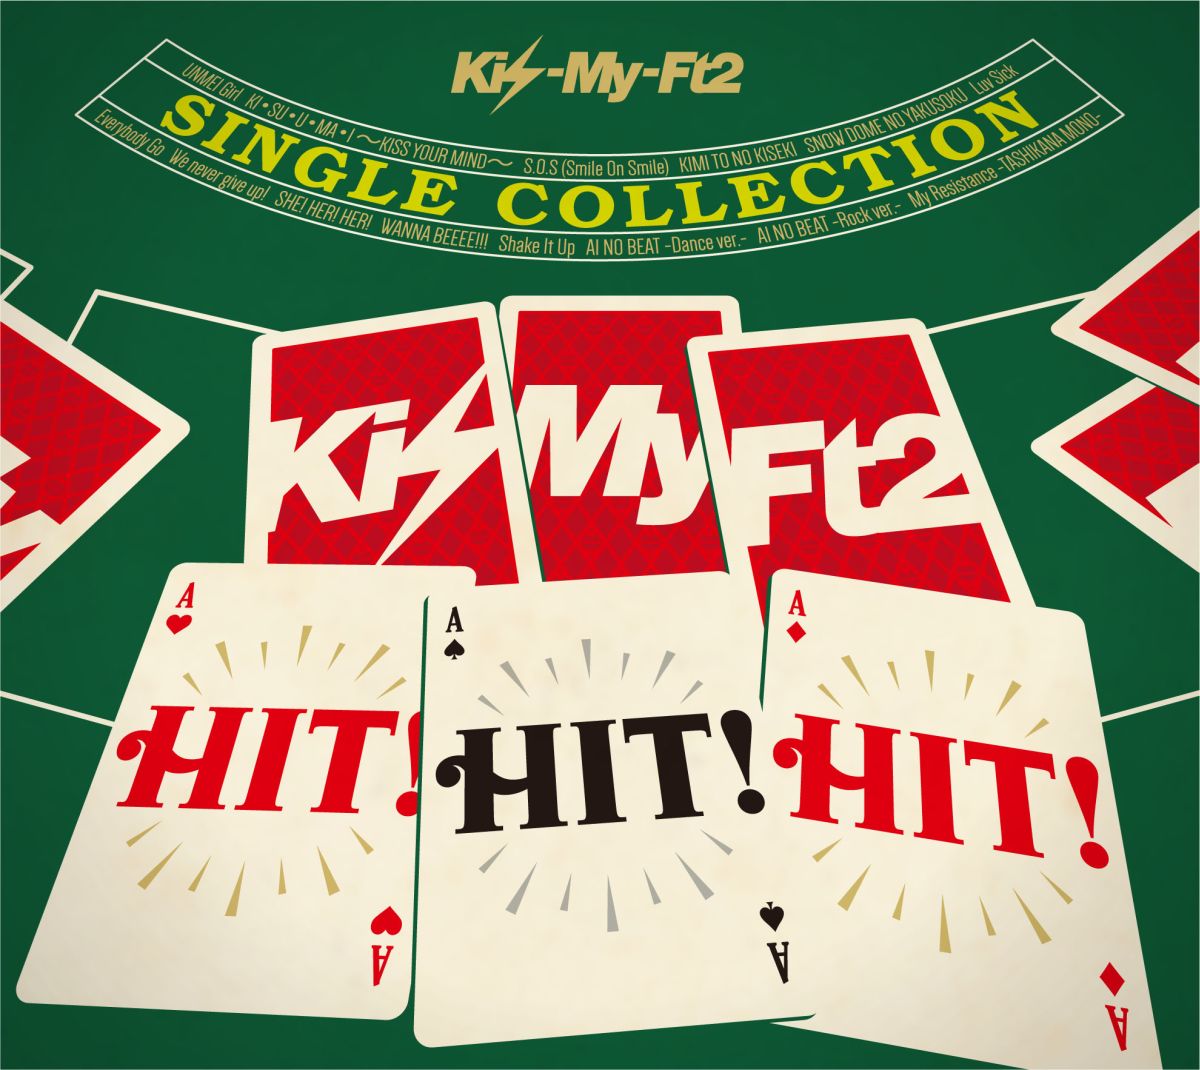 SINGLE COLLECTIONuHIT! HIT! HIT!v(񐶎Y CD+2DVD) [ Kis-My-Ft2 ]